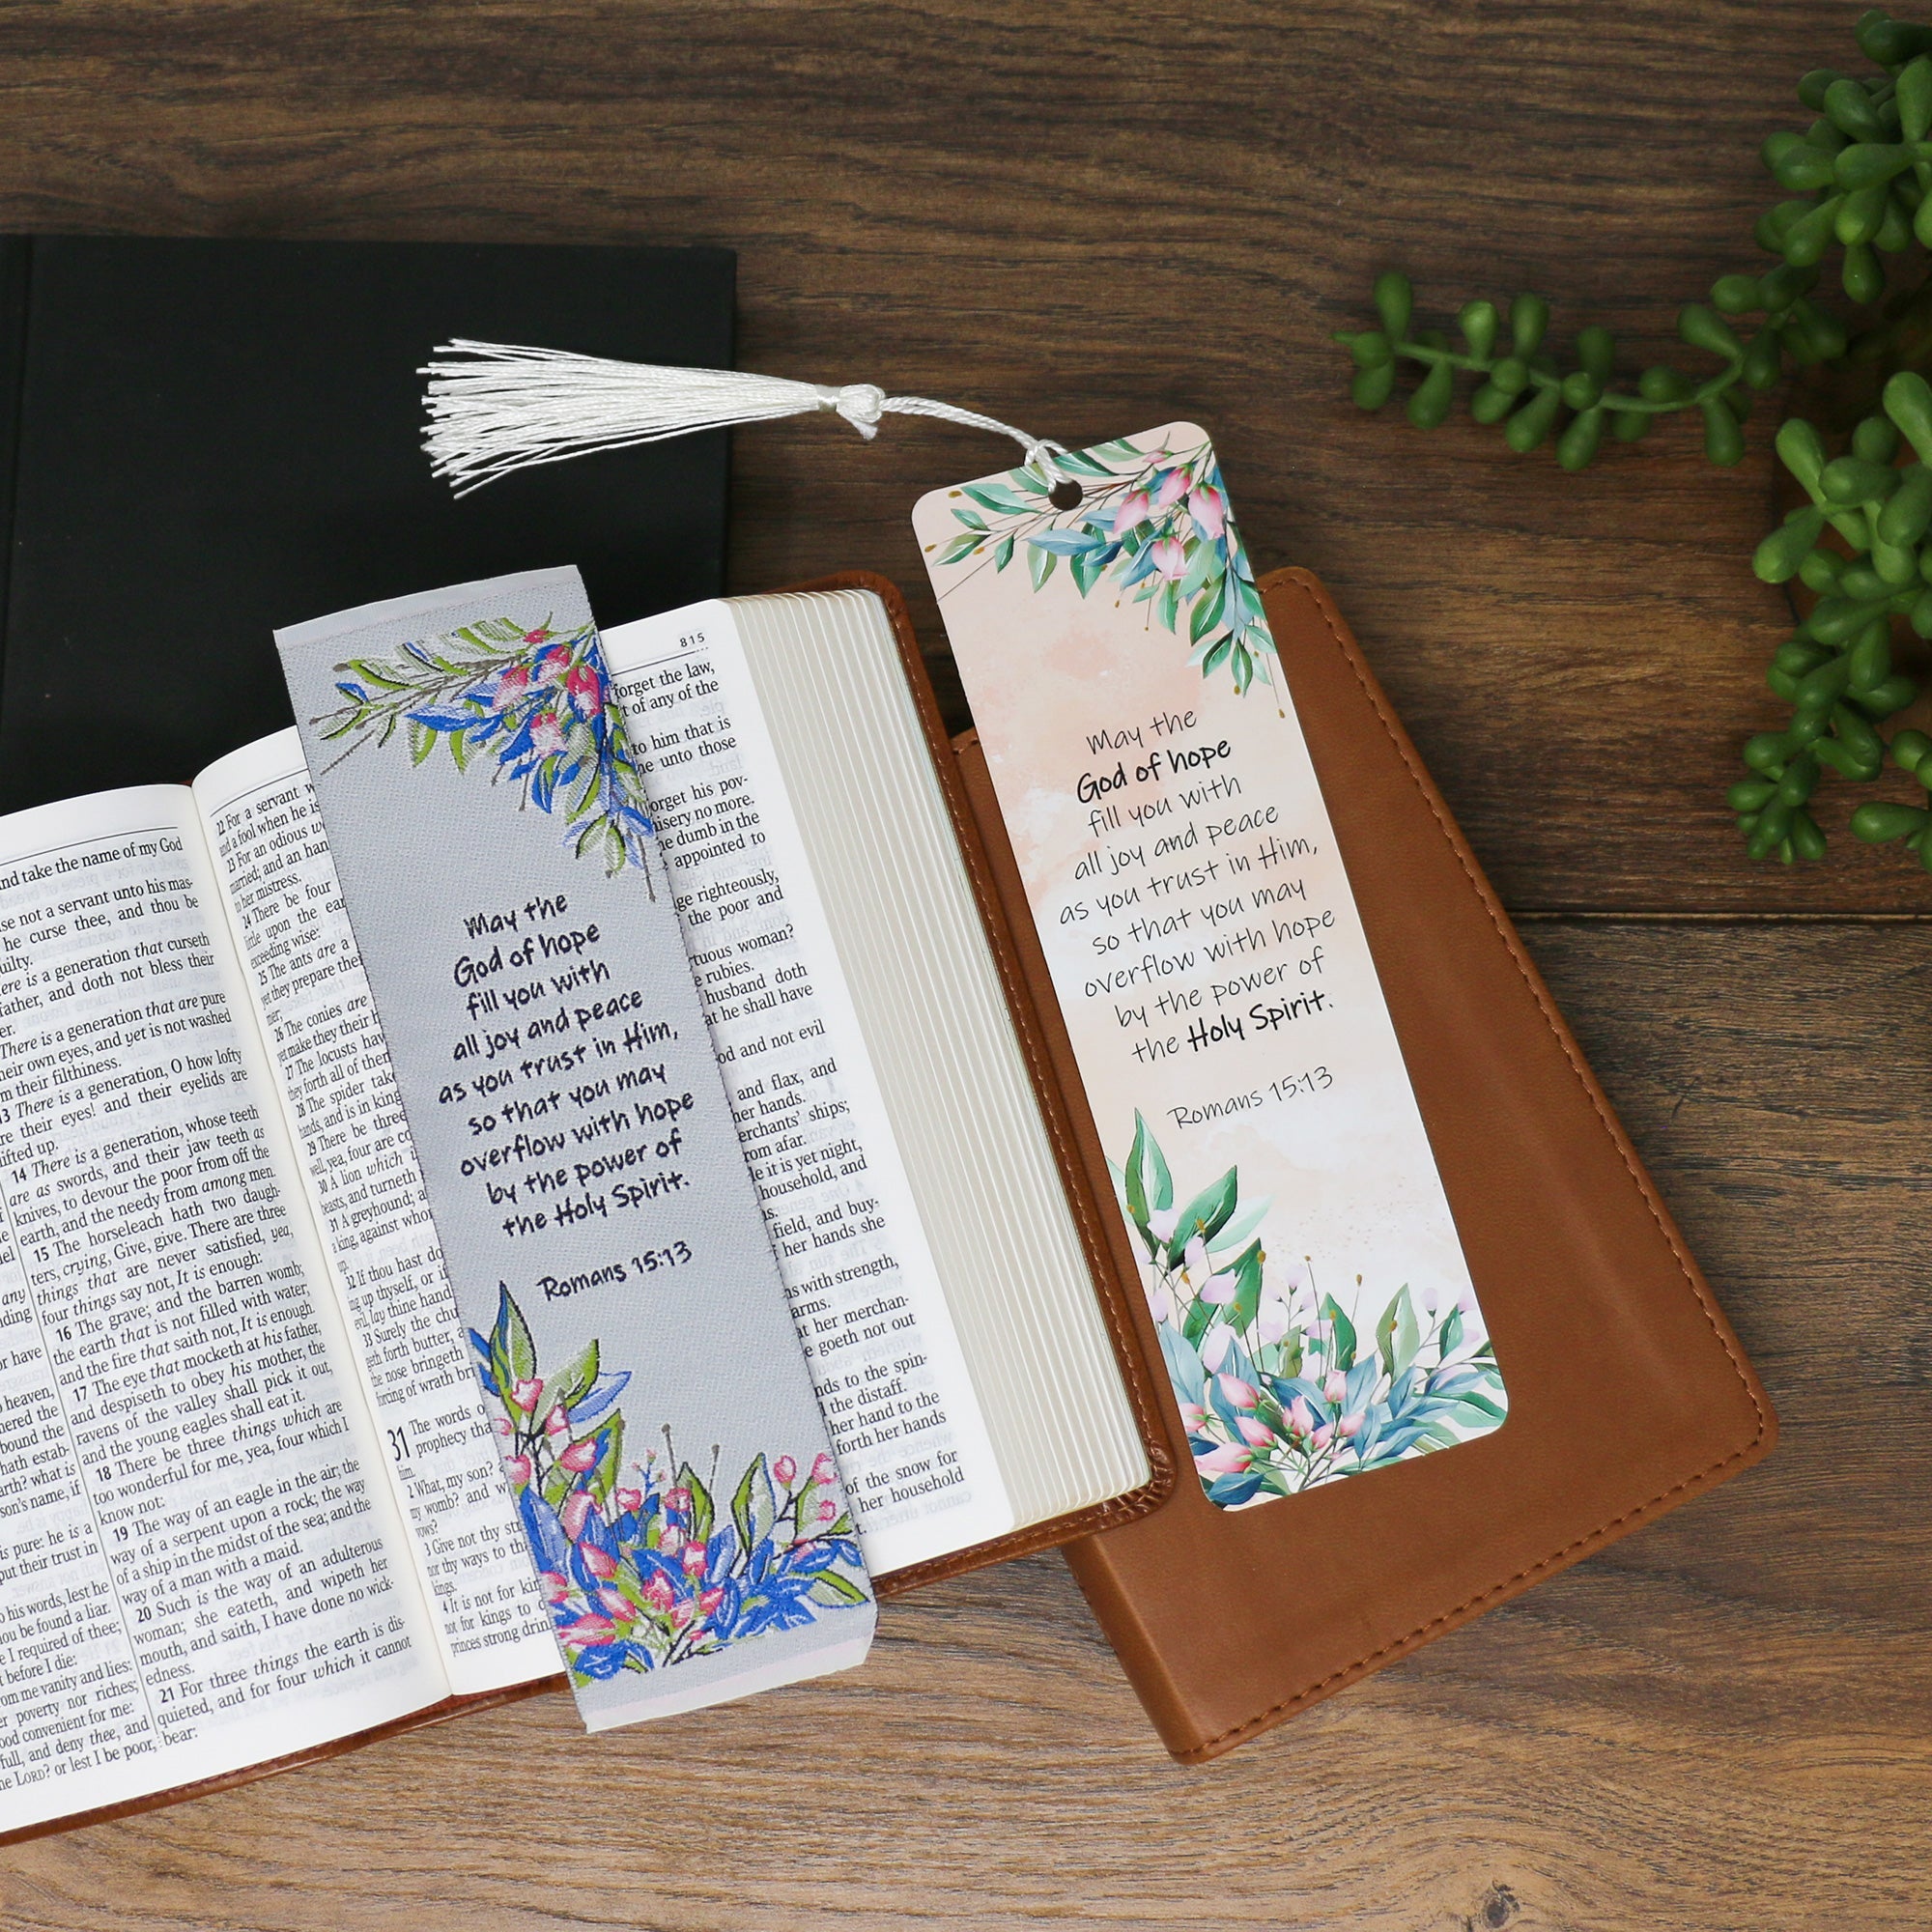 May the God of hope fill you - Romans 15:13 Woven and Tasseled Bookmark Set